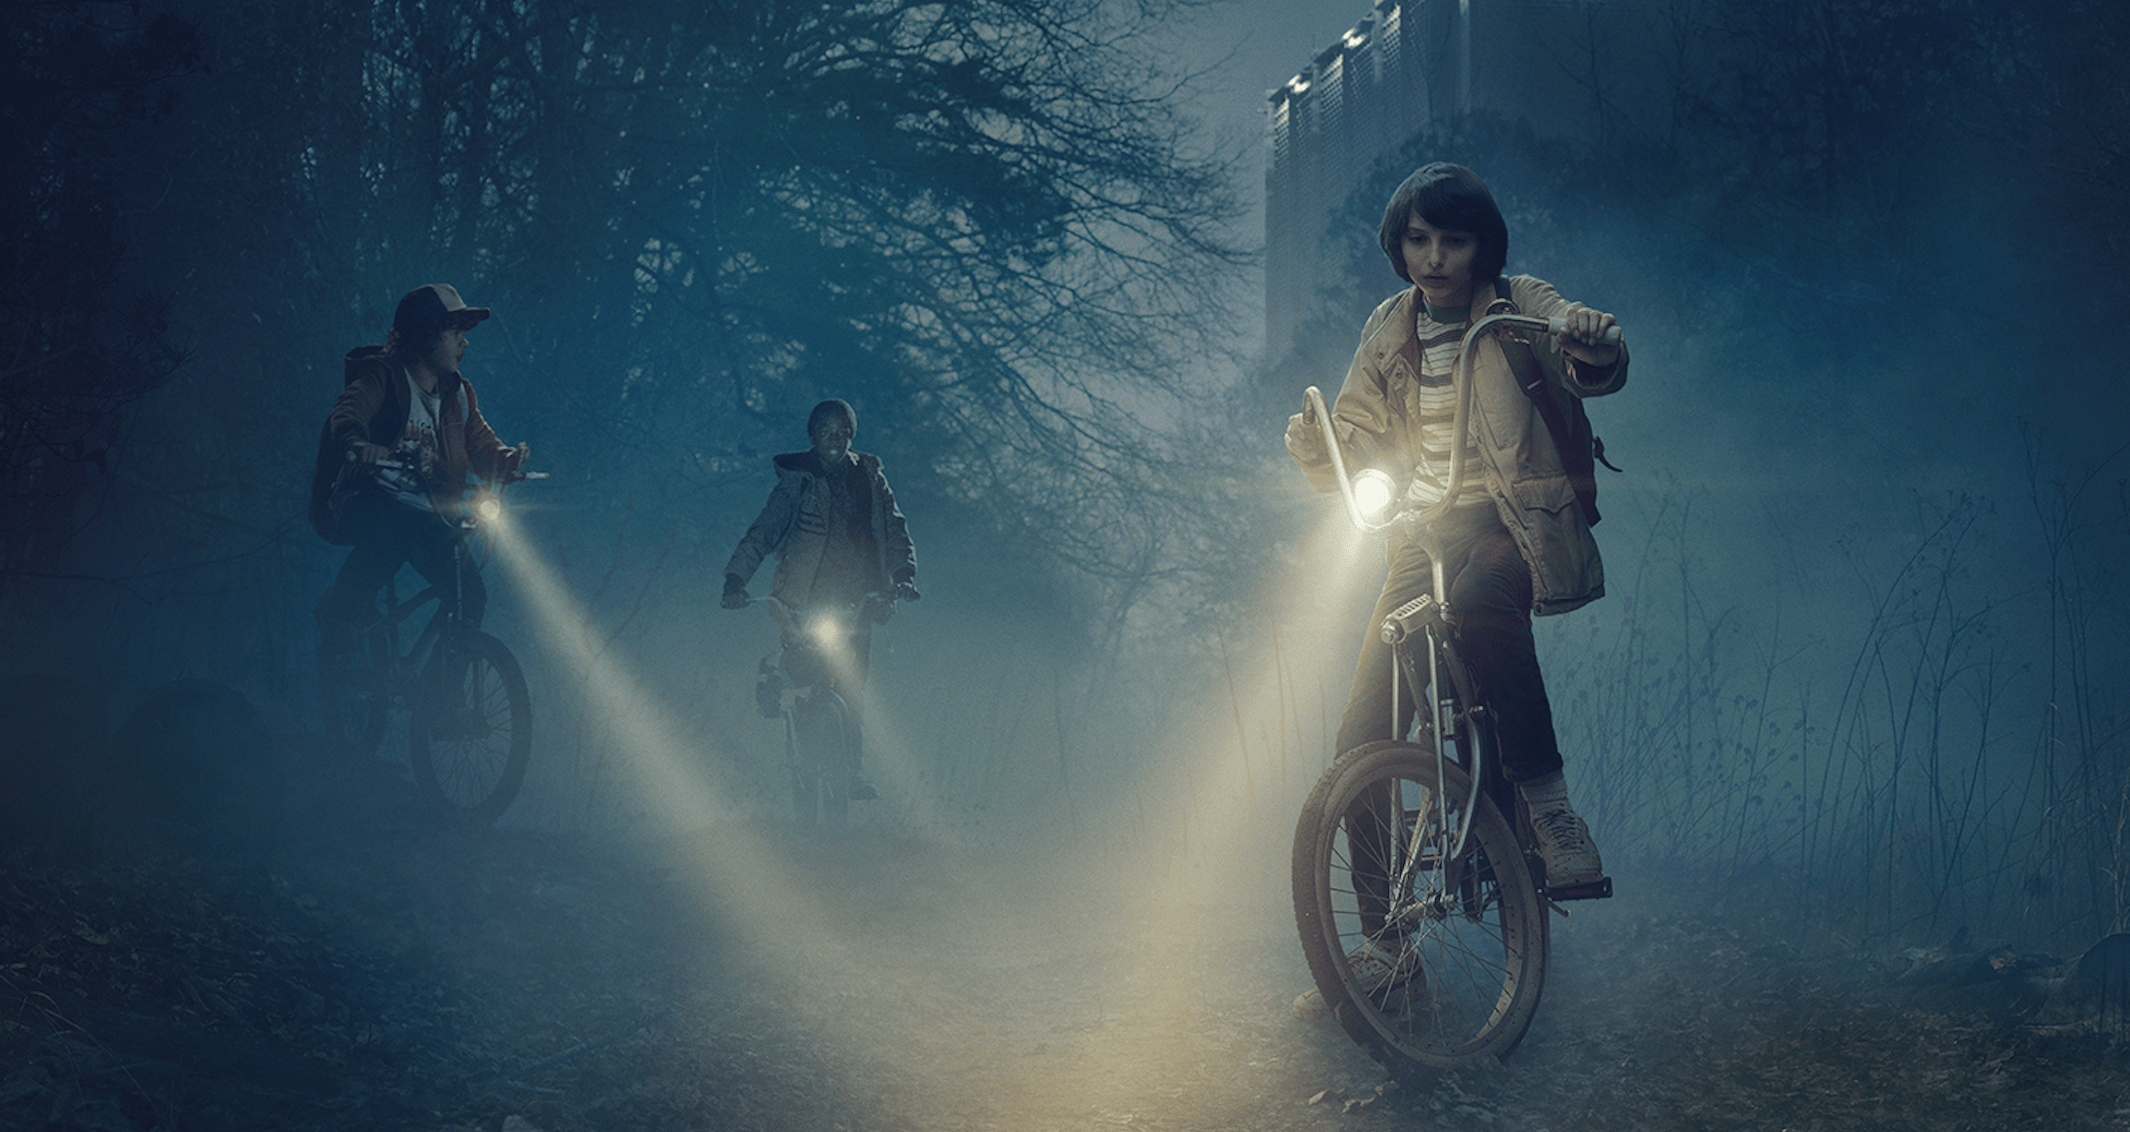 night, bicycle, vehicle, blue, Stranger Things, Netflix, darkness, screenshot, atmospheric phenomenon, computer wallpaper, atmosphere of earth, extreme sport Gallery HD Wallpaper